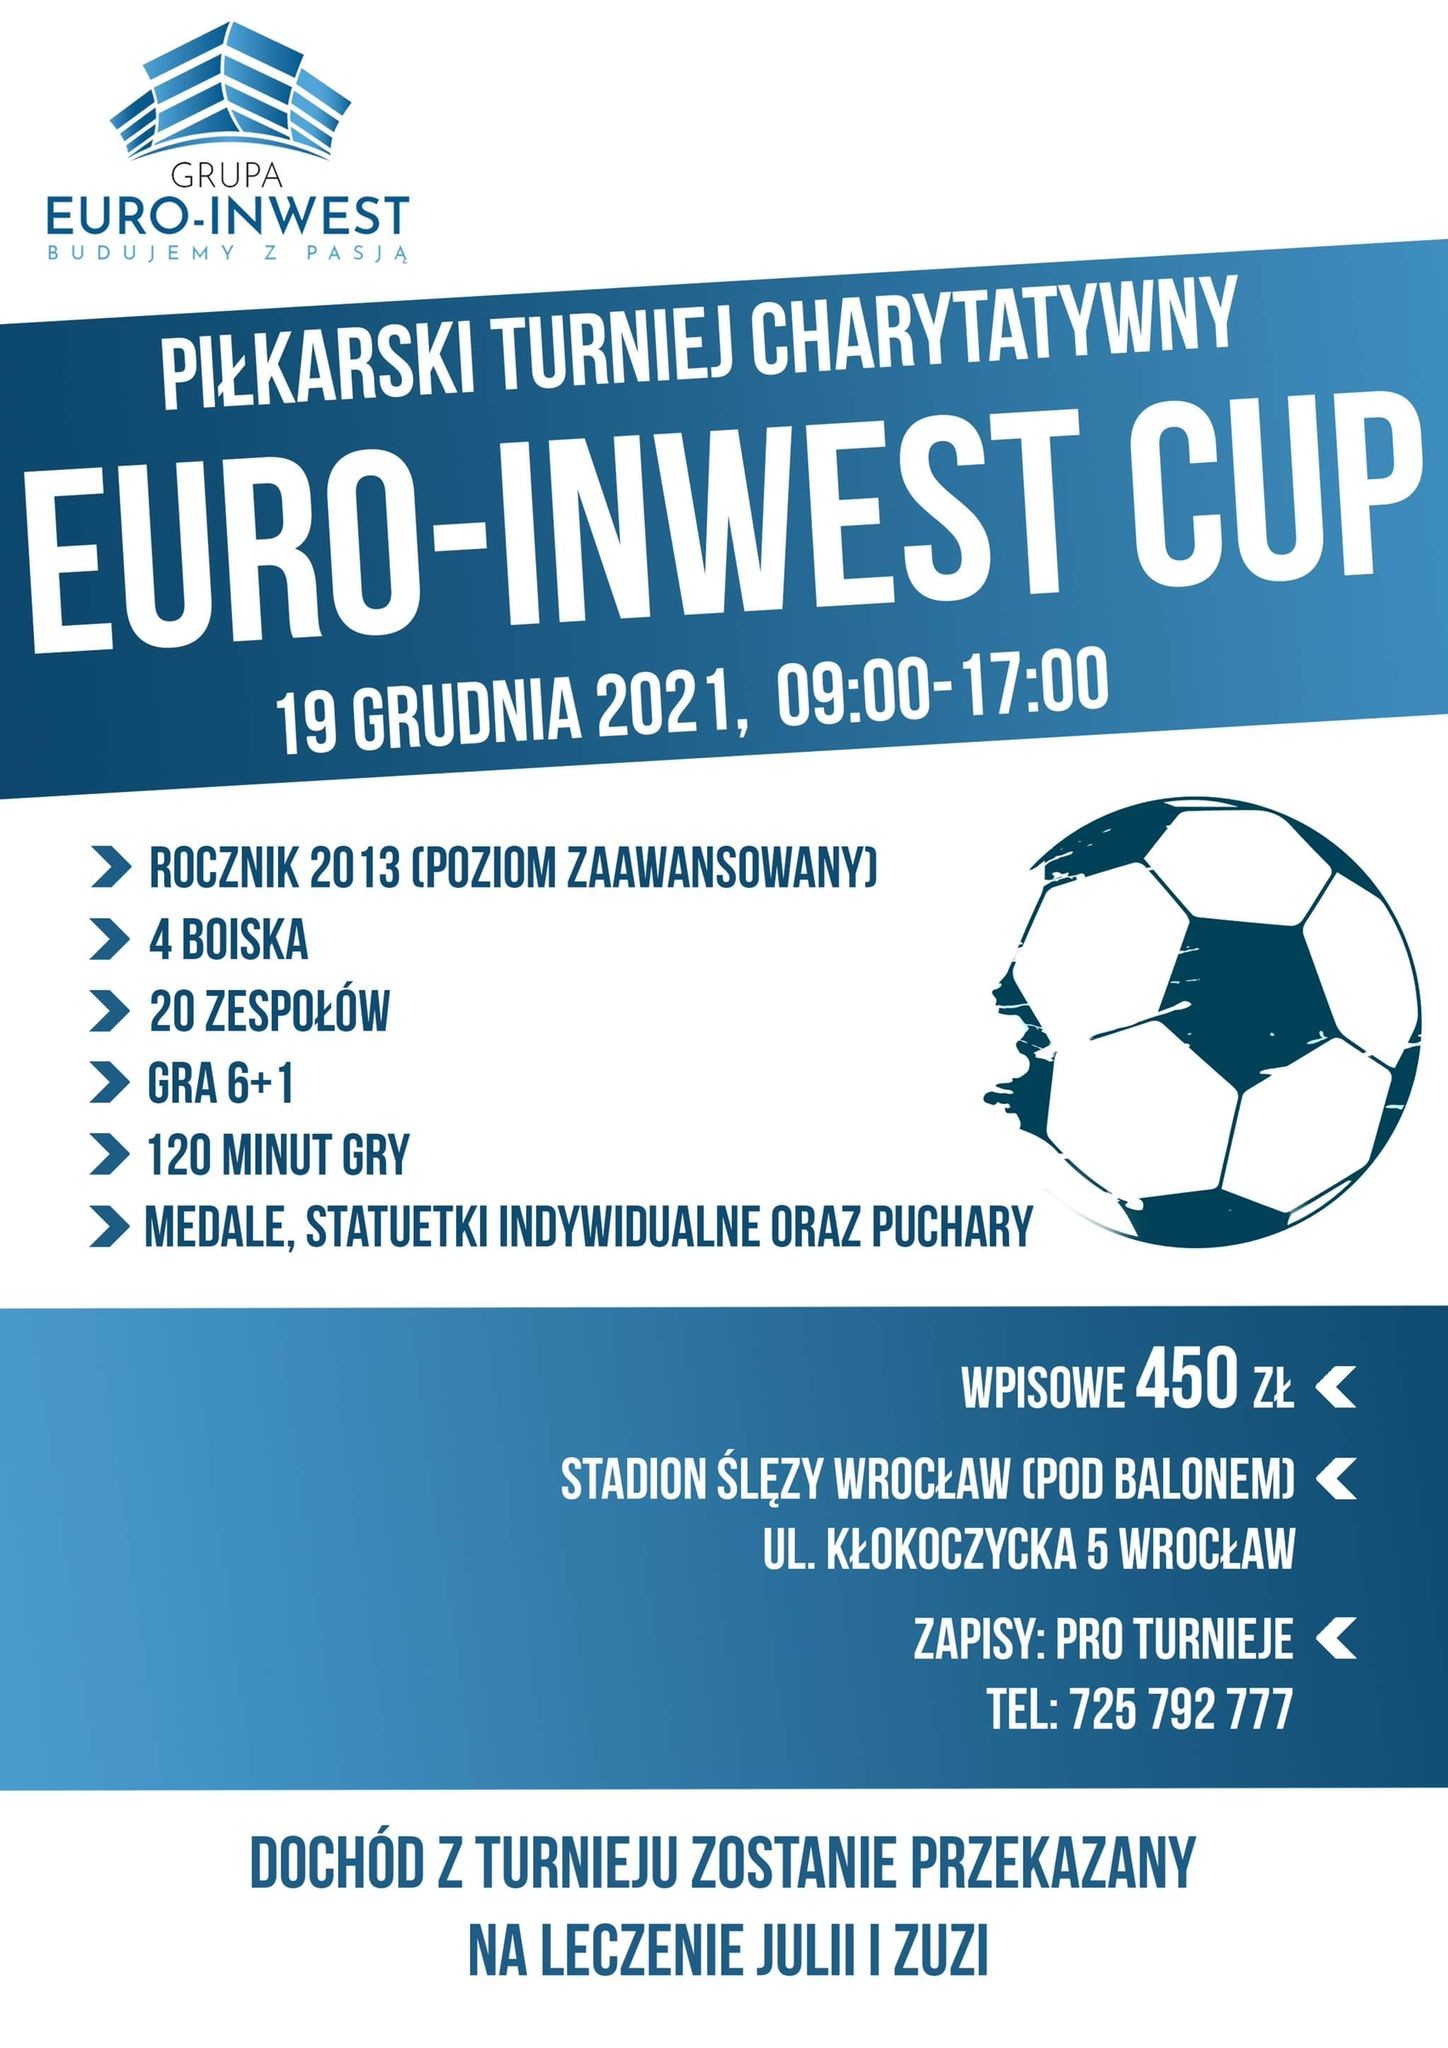 EURO-INWEST CUP 19.12.2021